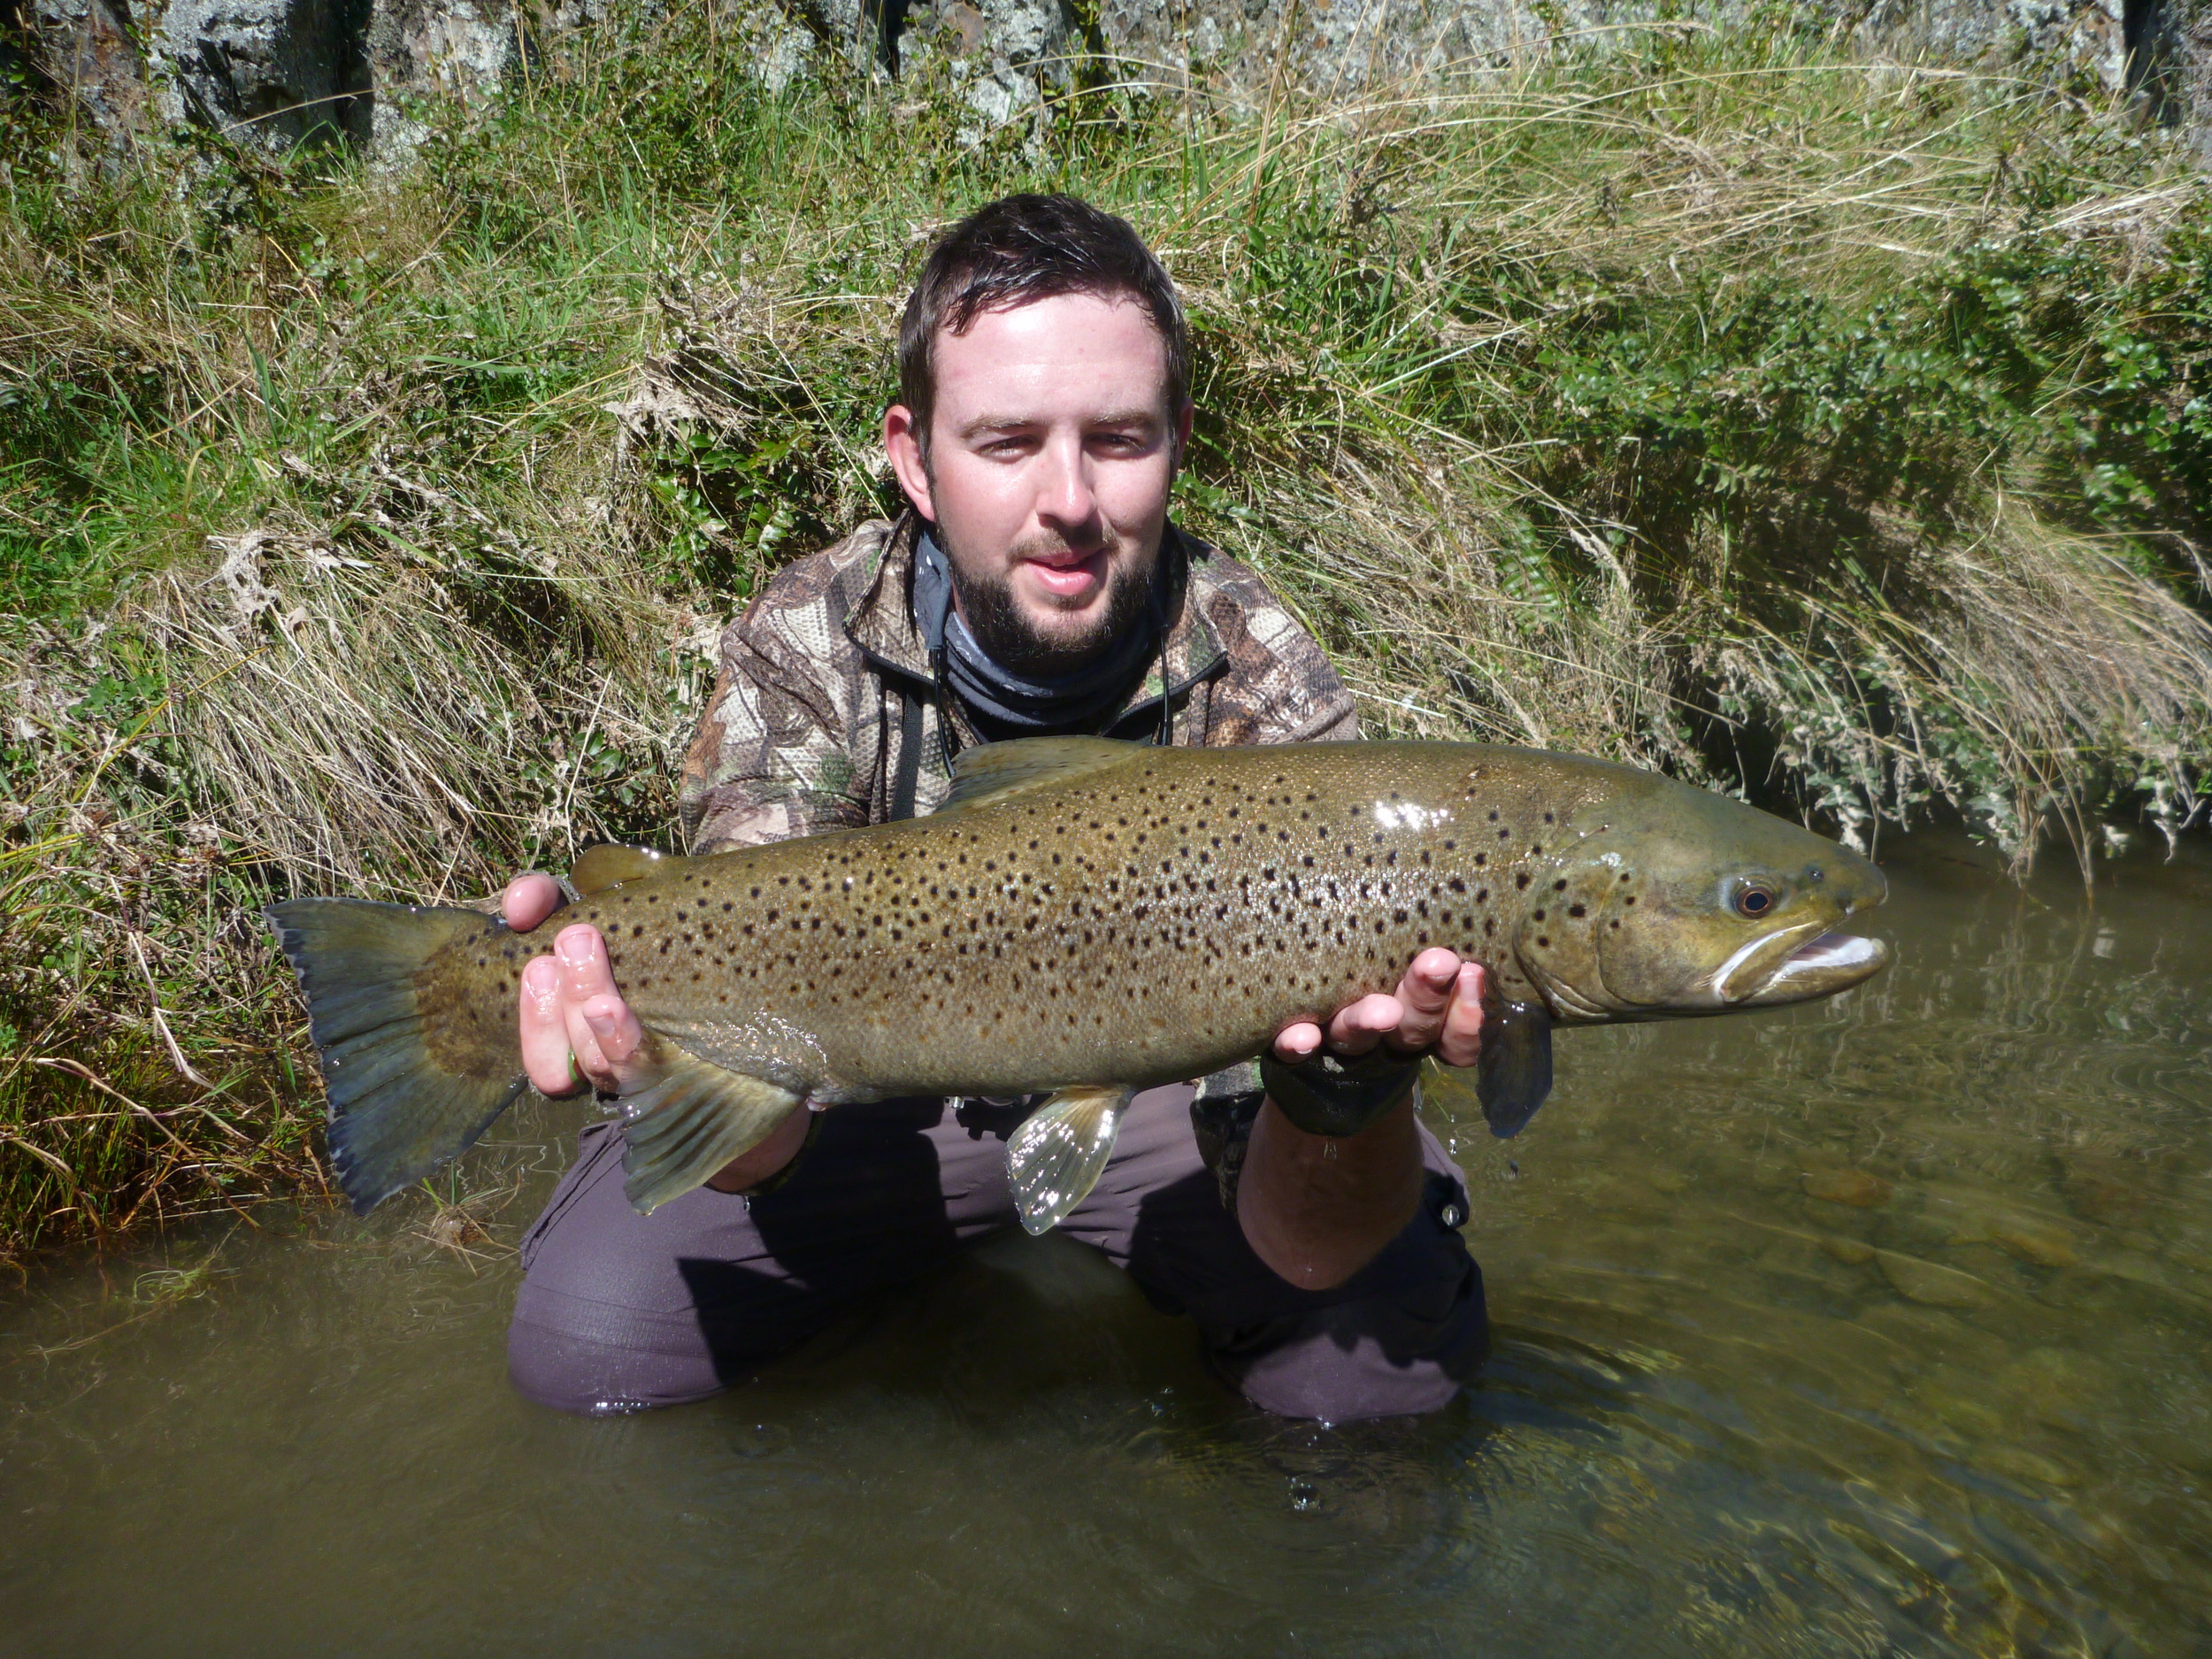 Fly fishing New Zealand for trophy brown trout